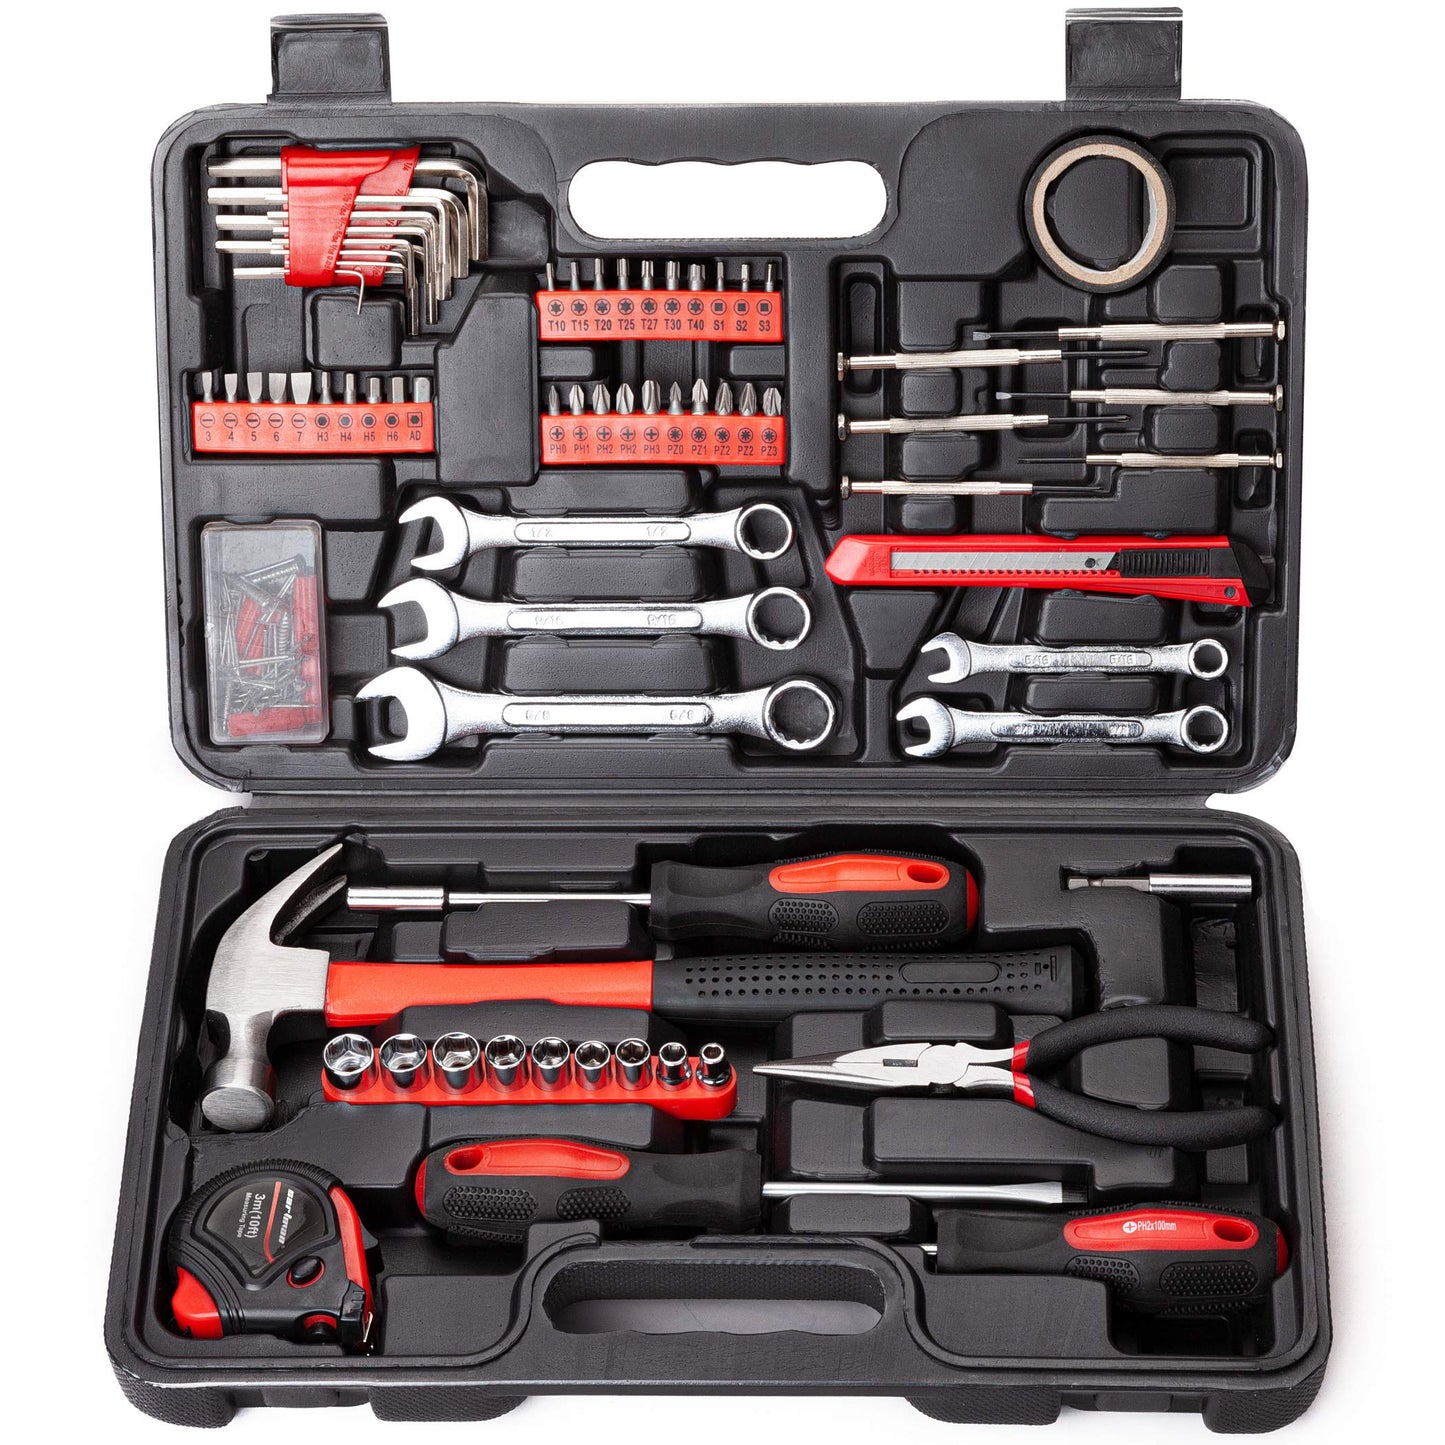 CARTMAN 148 Piece Automotive and Household Tool Set - Perfect for Car Enthusiasts and DIY Home Repairs